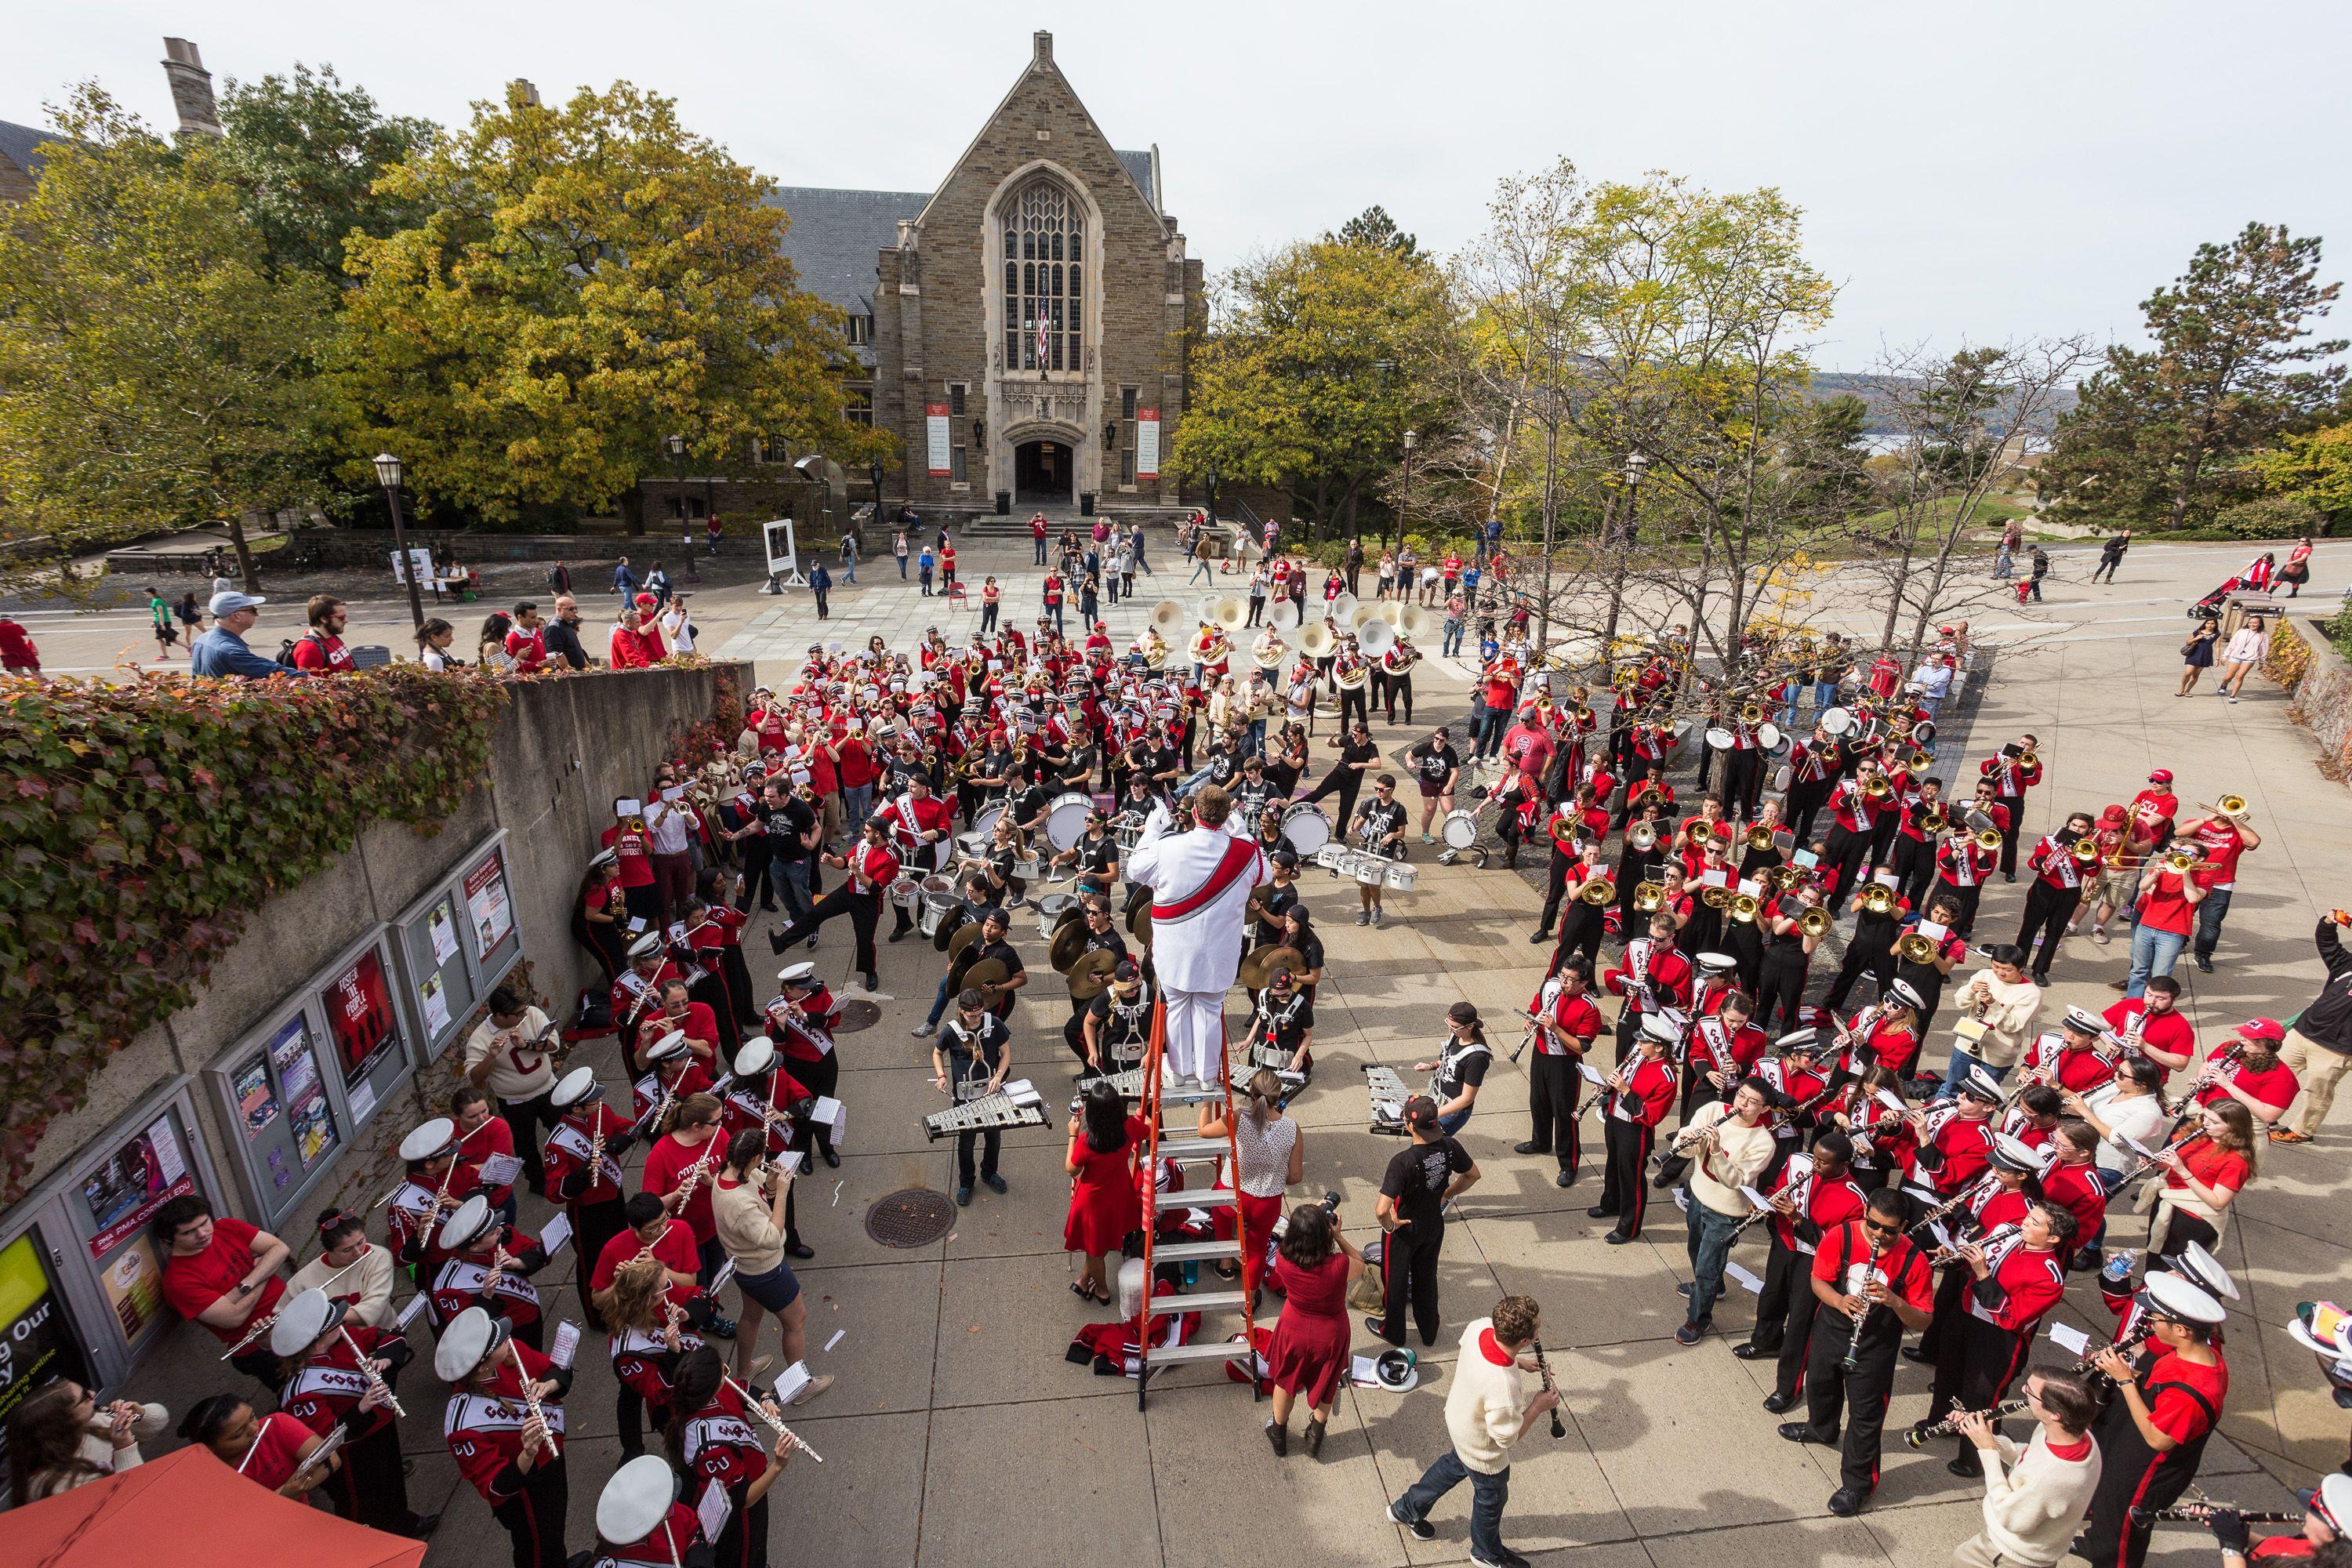 Cornell Big Red C Logo - File:Cornell Big Red marching Band.jpg - Wikimedia Commons